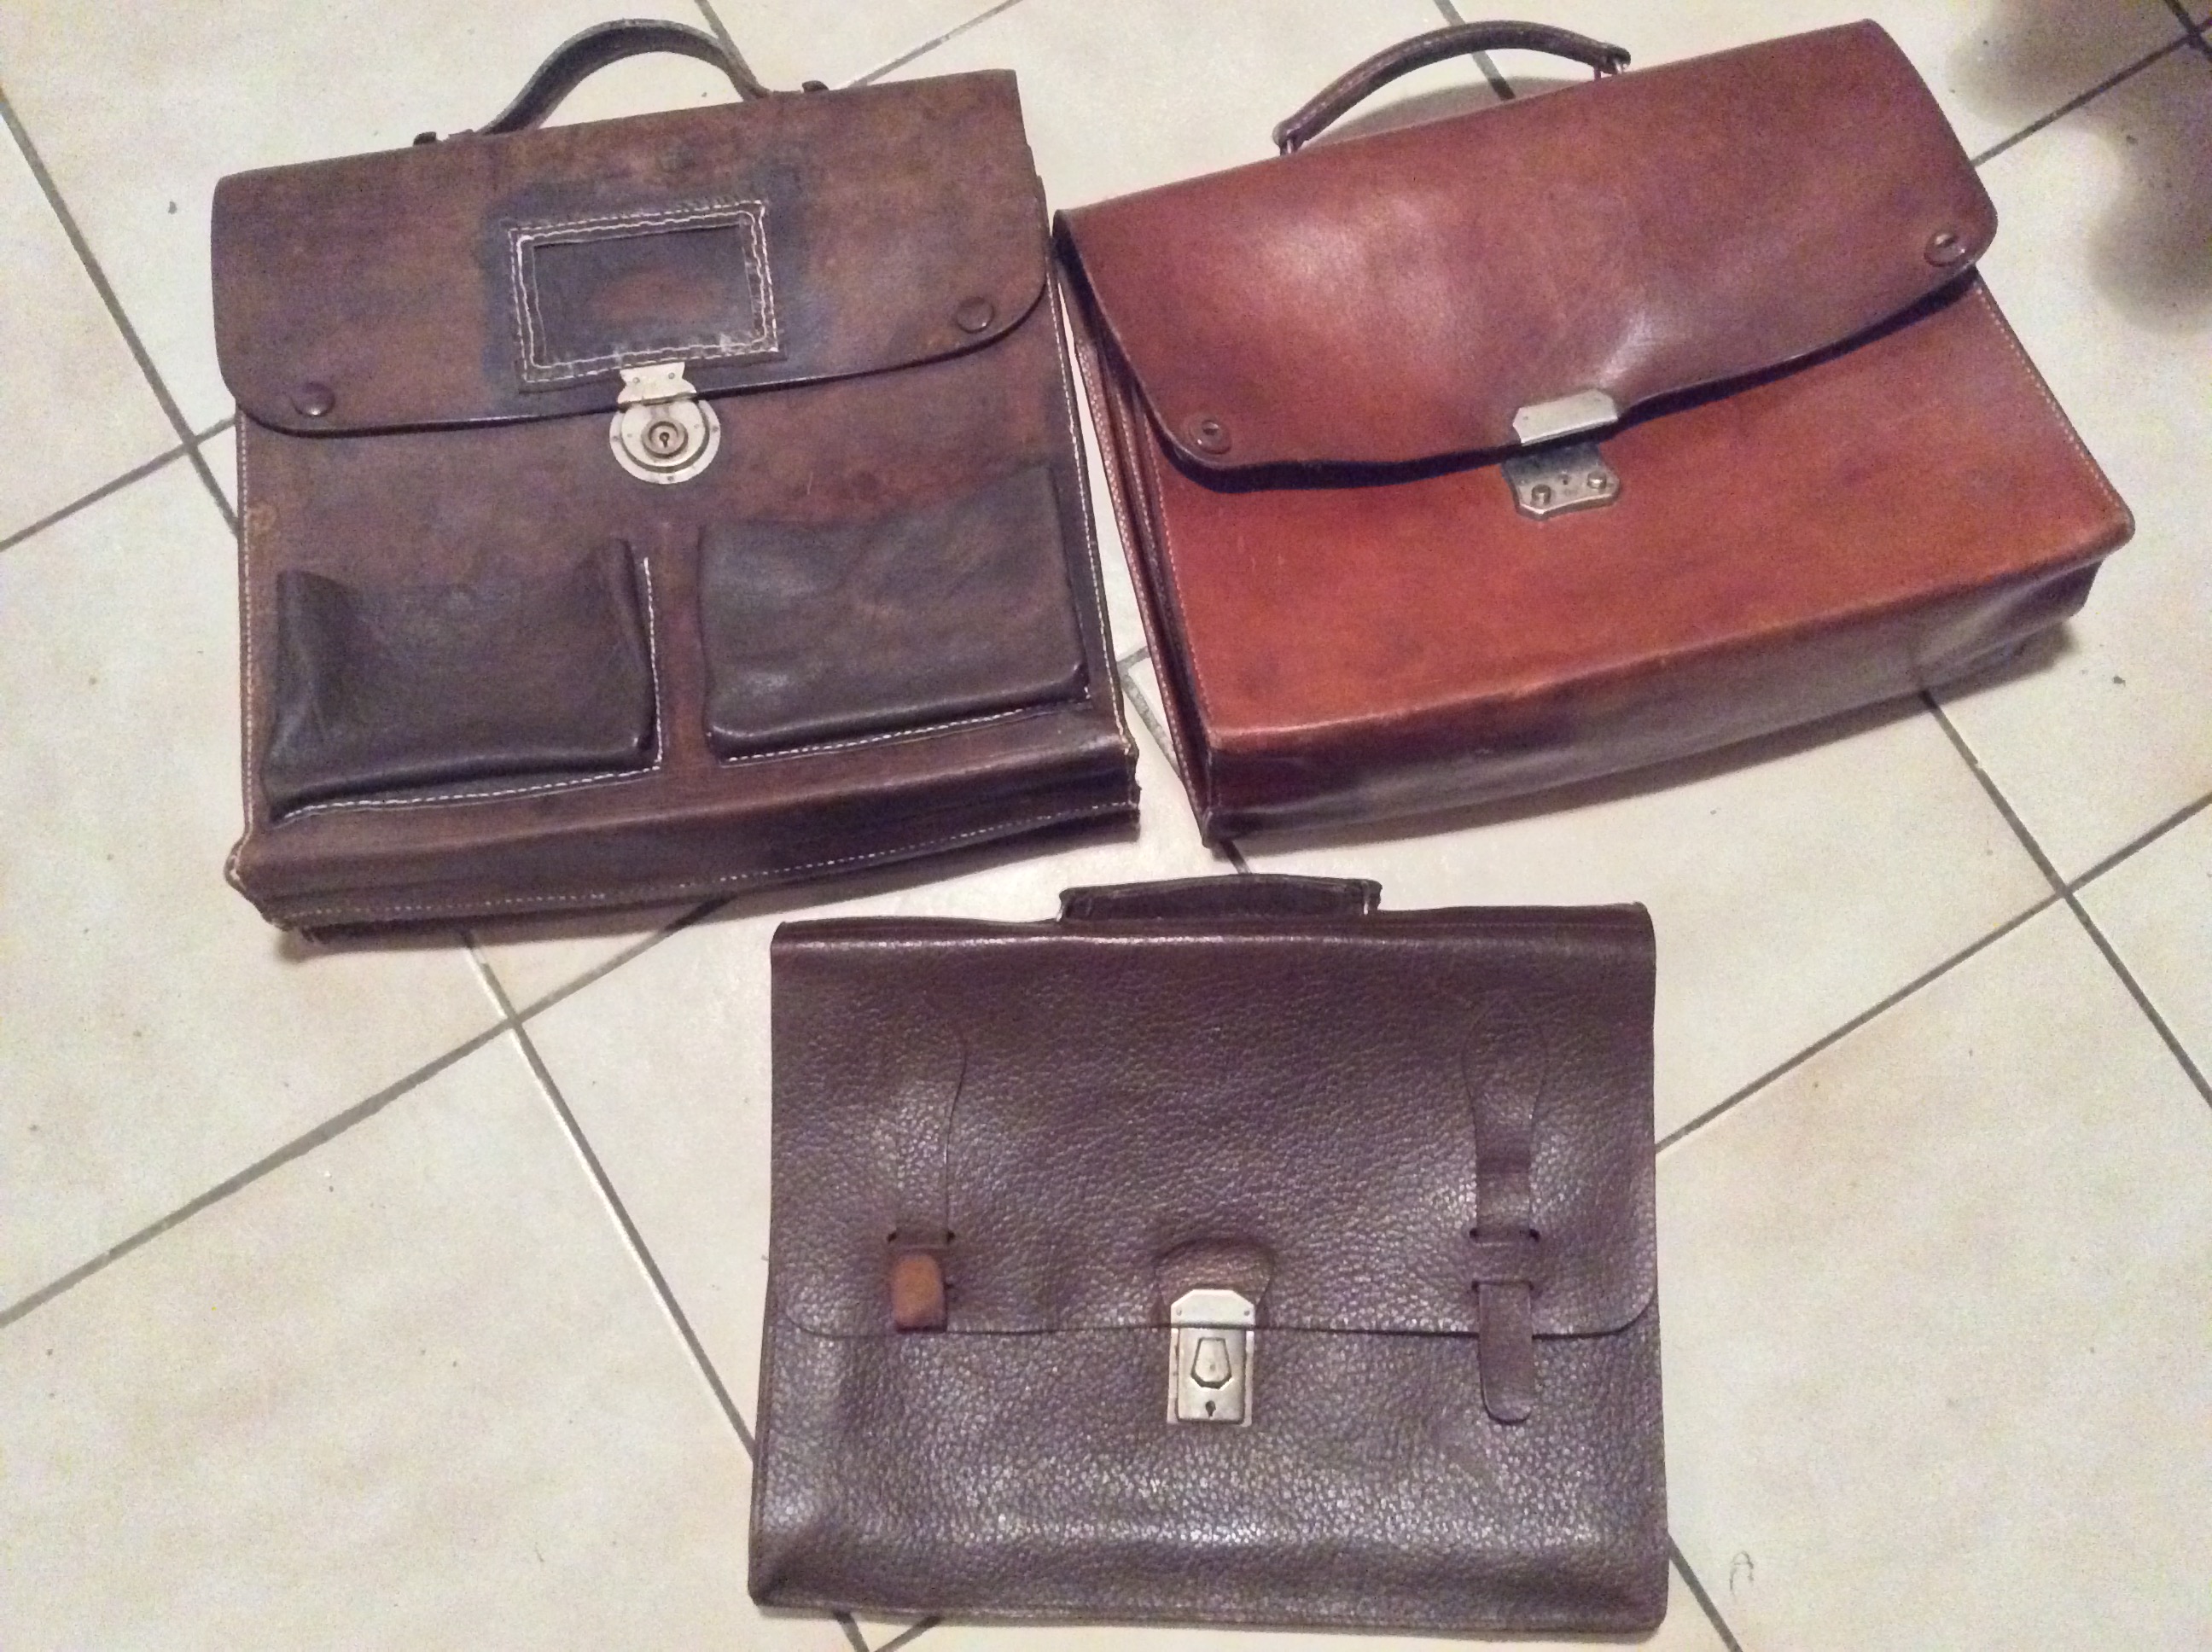 Satchel vs Purse - What's the Difference? – Vintage Leather Gear